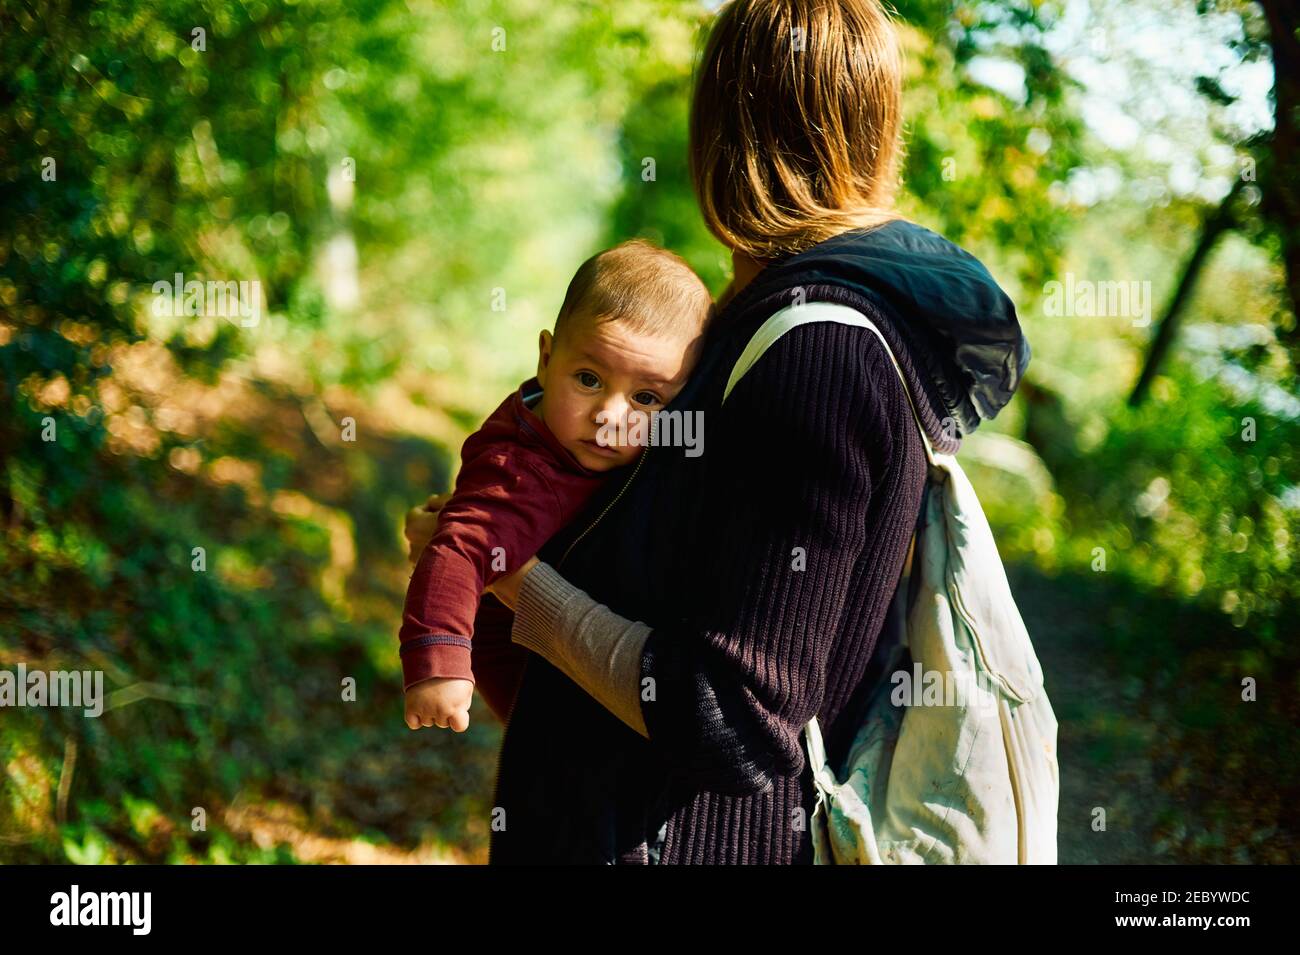 A young mother with her baby in a sling is standing in the woods on a sunny autumn day Stock Photo